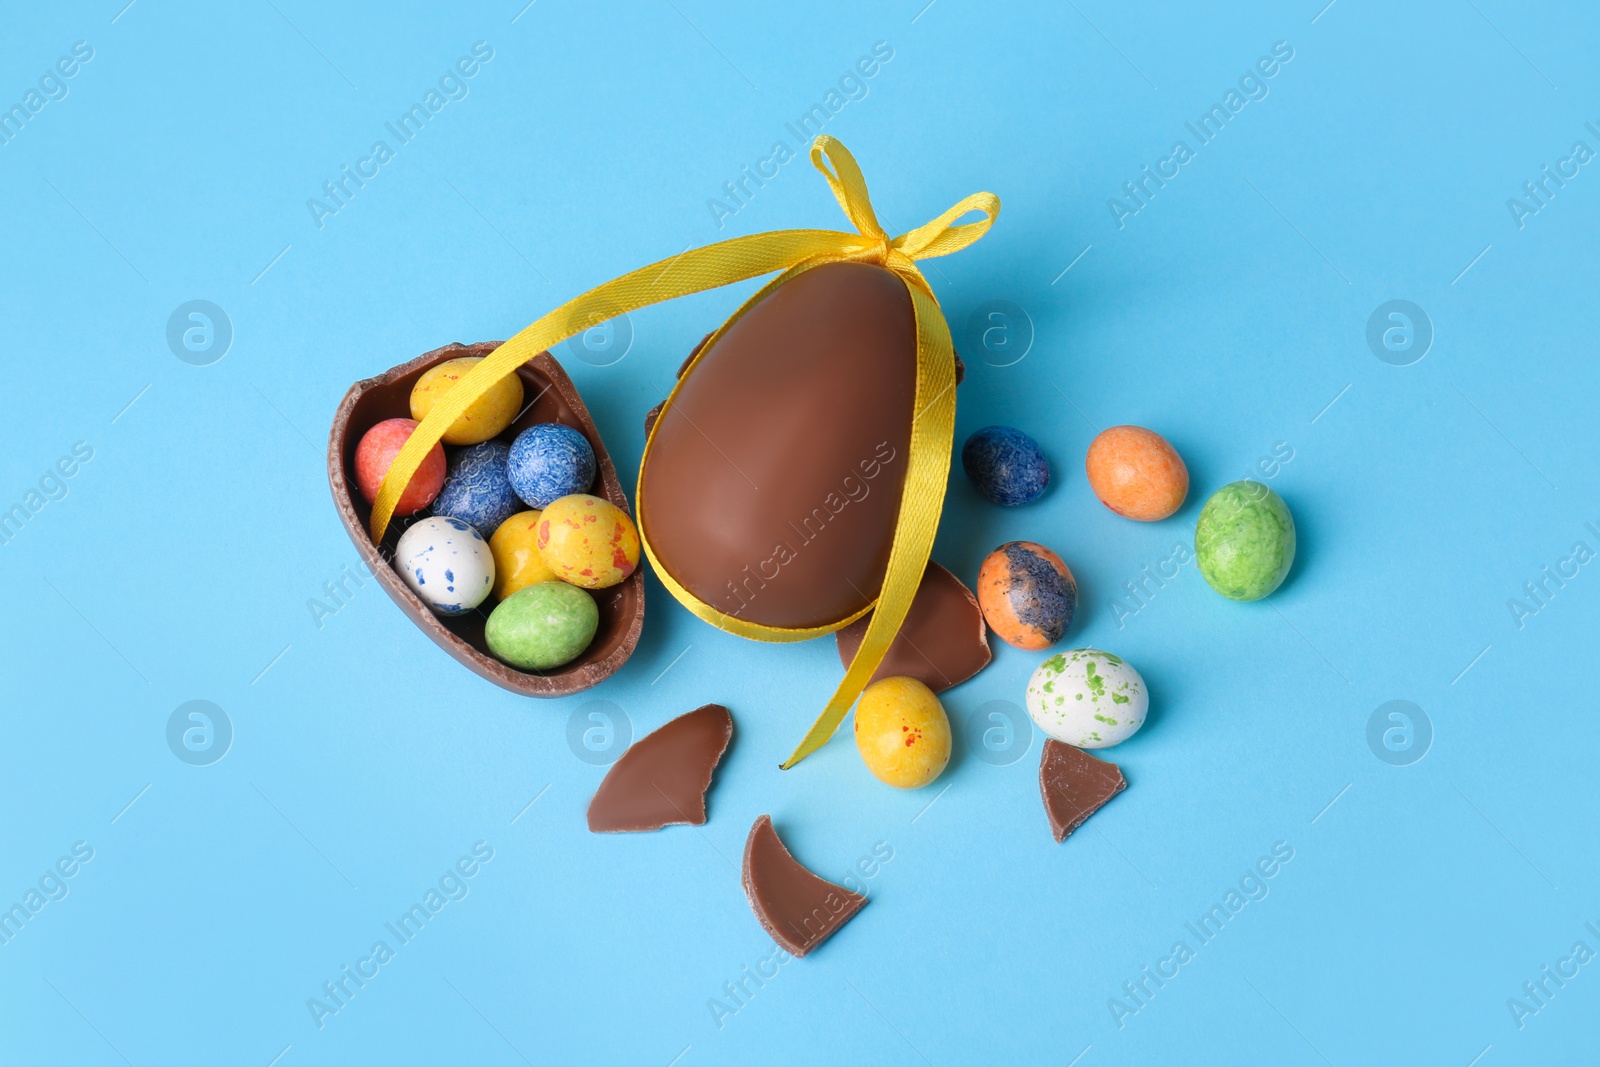 Photo of Tasty whole chocolate egg with yellow bow and different candies on light blue background, above view